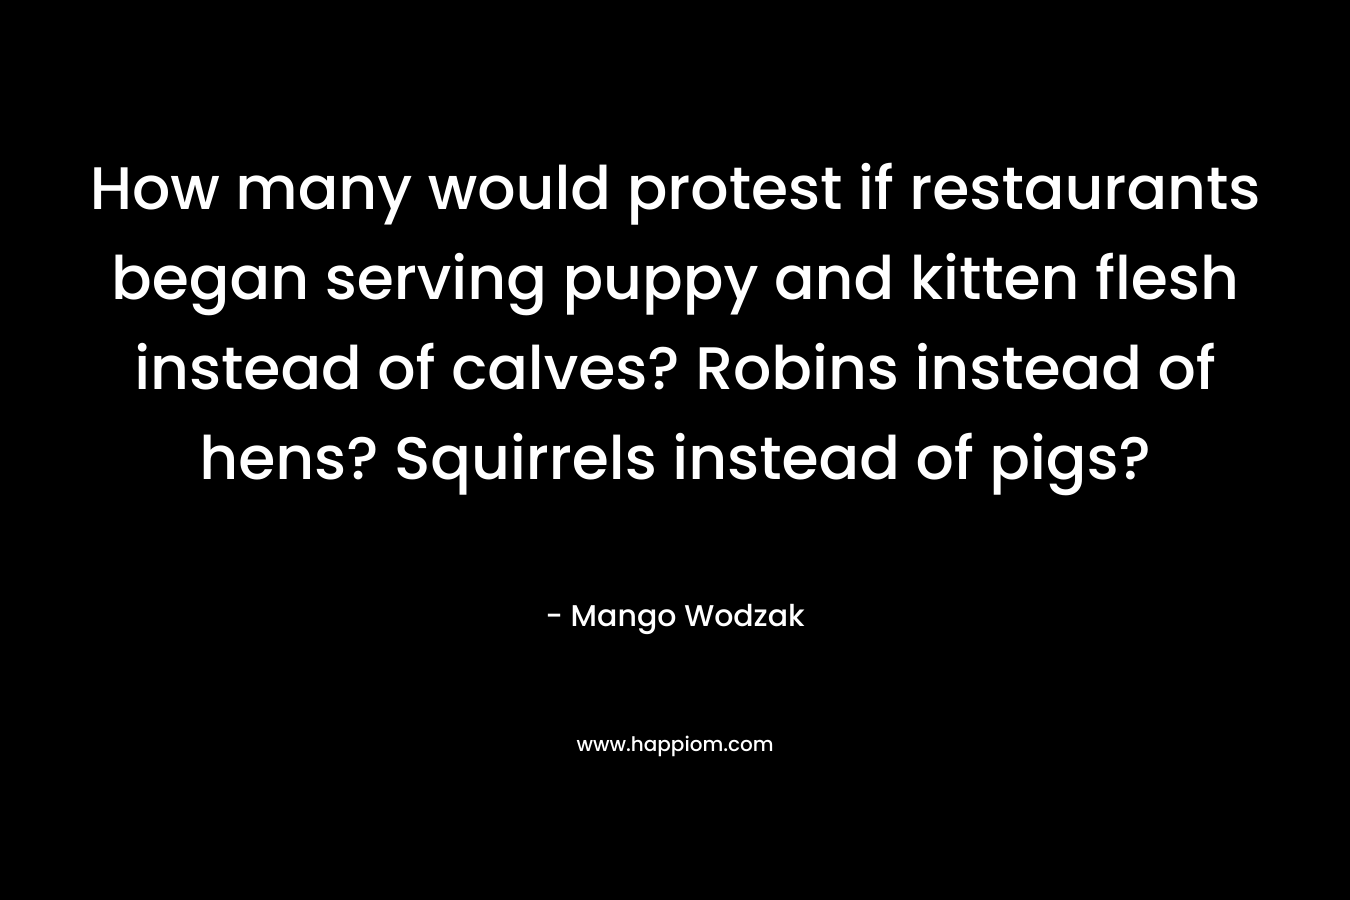 How many would protest if restaurants began serving puppy and kitten flesh instead of calves? Robins instead of hens? Squirrels instead of pigs?